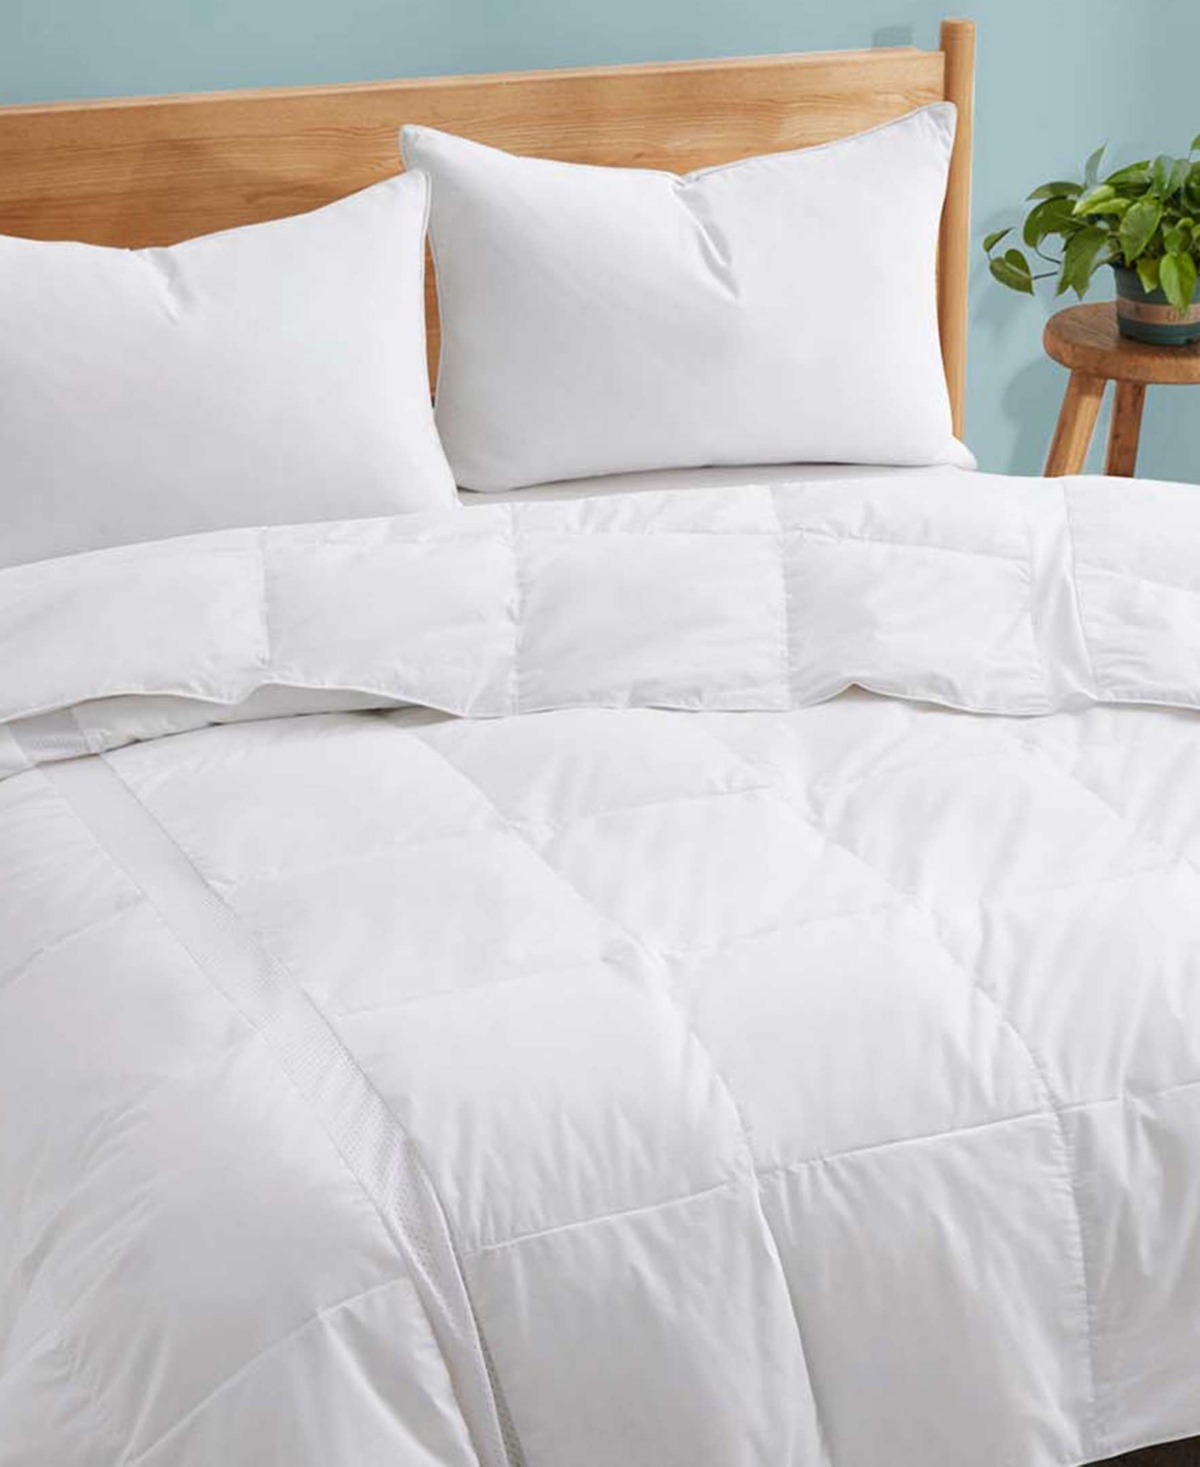 Unikome Extra Cooling Down Lightweight Comforter, Full/queen In White